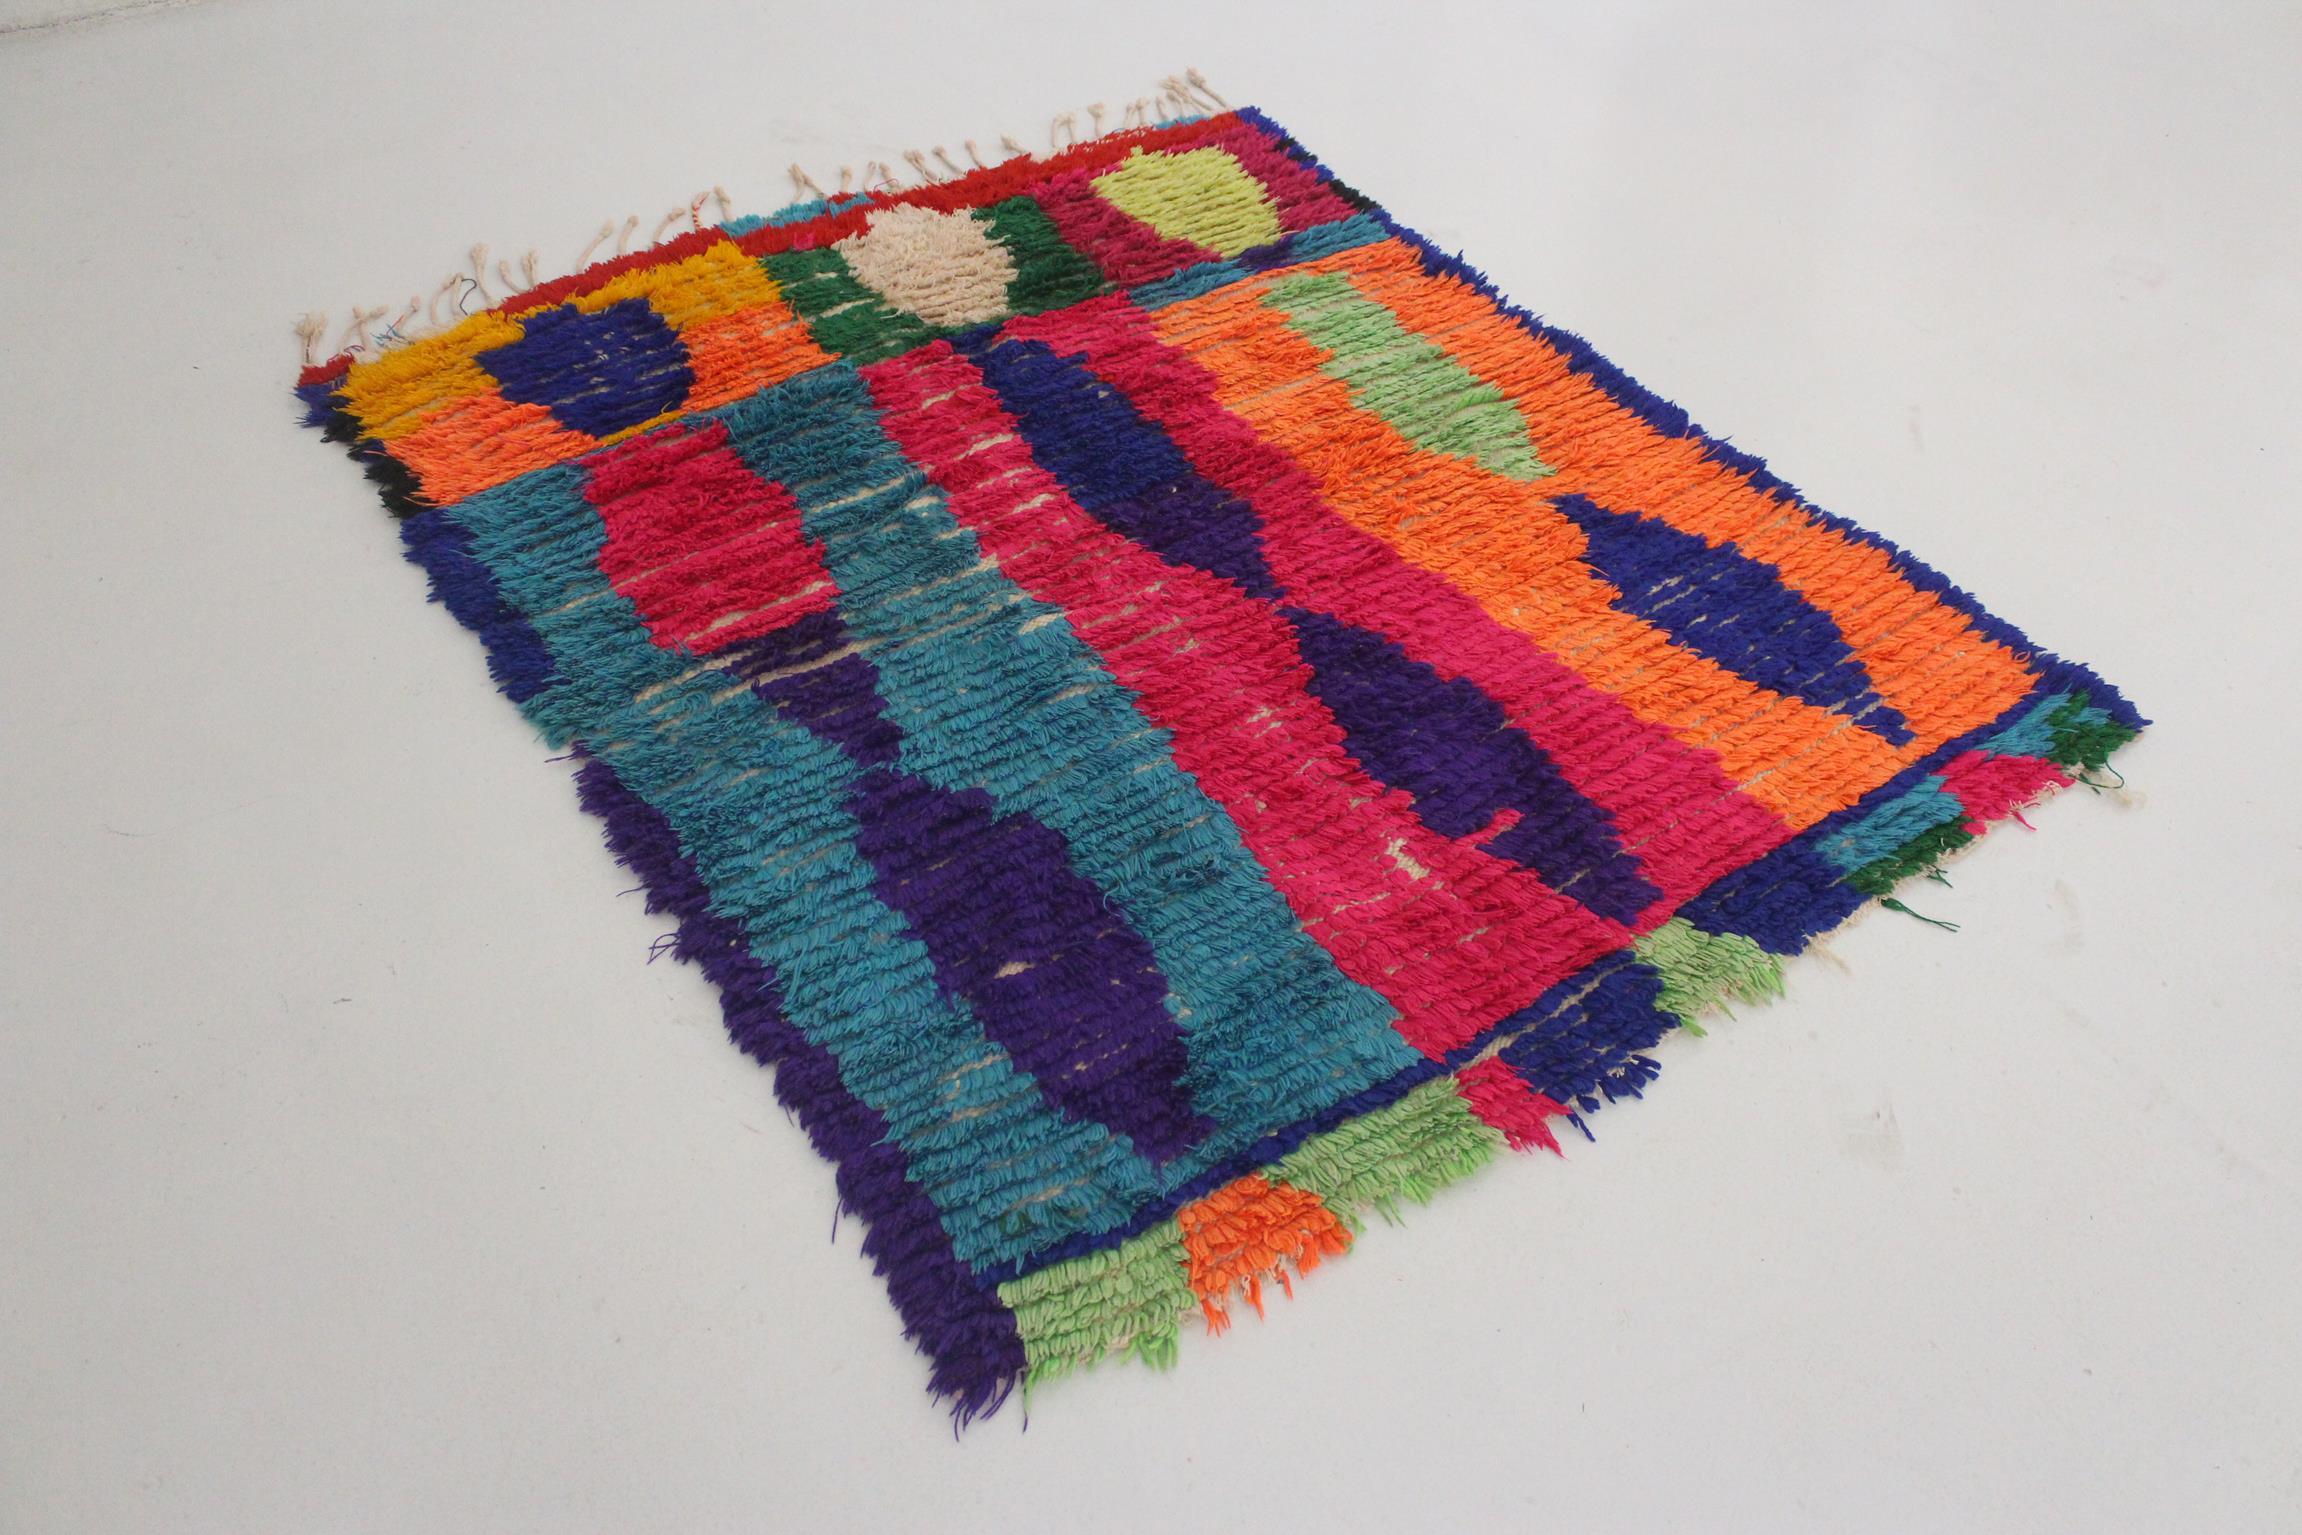 I found this colorful rug in a small berber village during a sourcing trip in the area of Azilal; I saw it from the road as it was hanging in the sun and I was glad I could meet the maker named Fatima. The rug is so joyful and bright that I couldn't